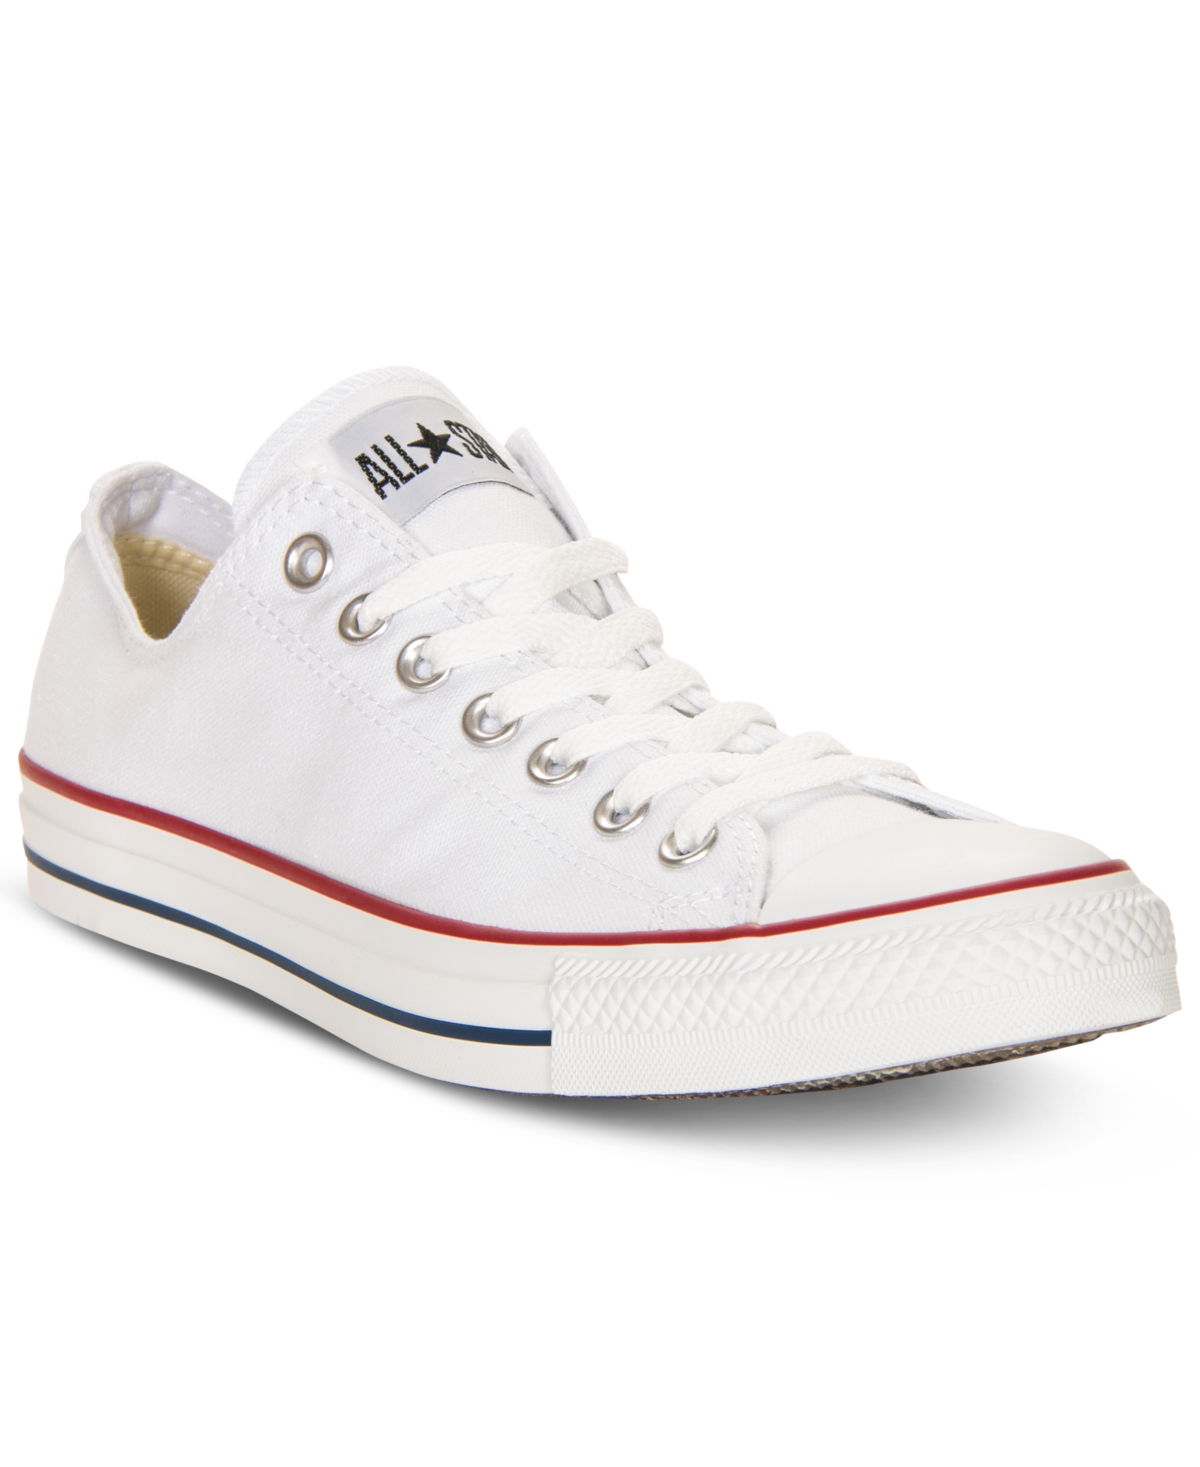 UPC 022859283151 product image for Converse Men's Chuck Taylor Low Top Sneakers from Finish Line | upcitemdb.com